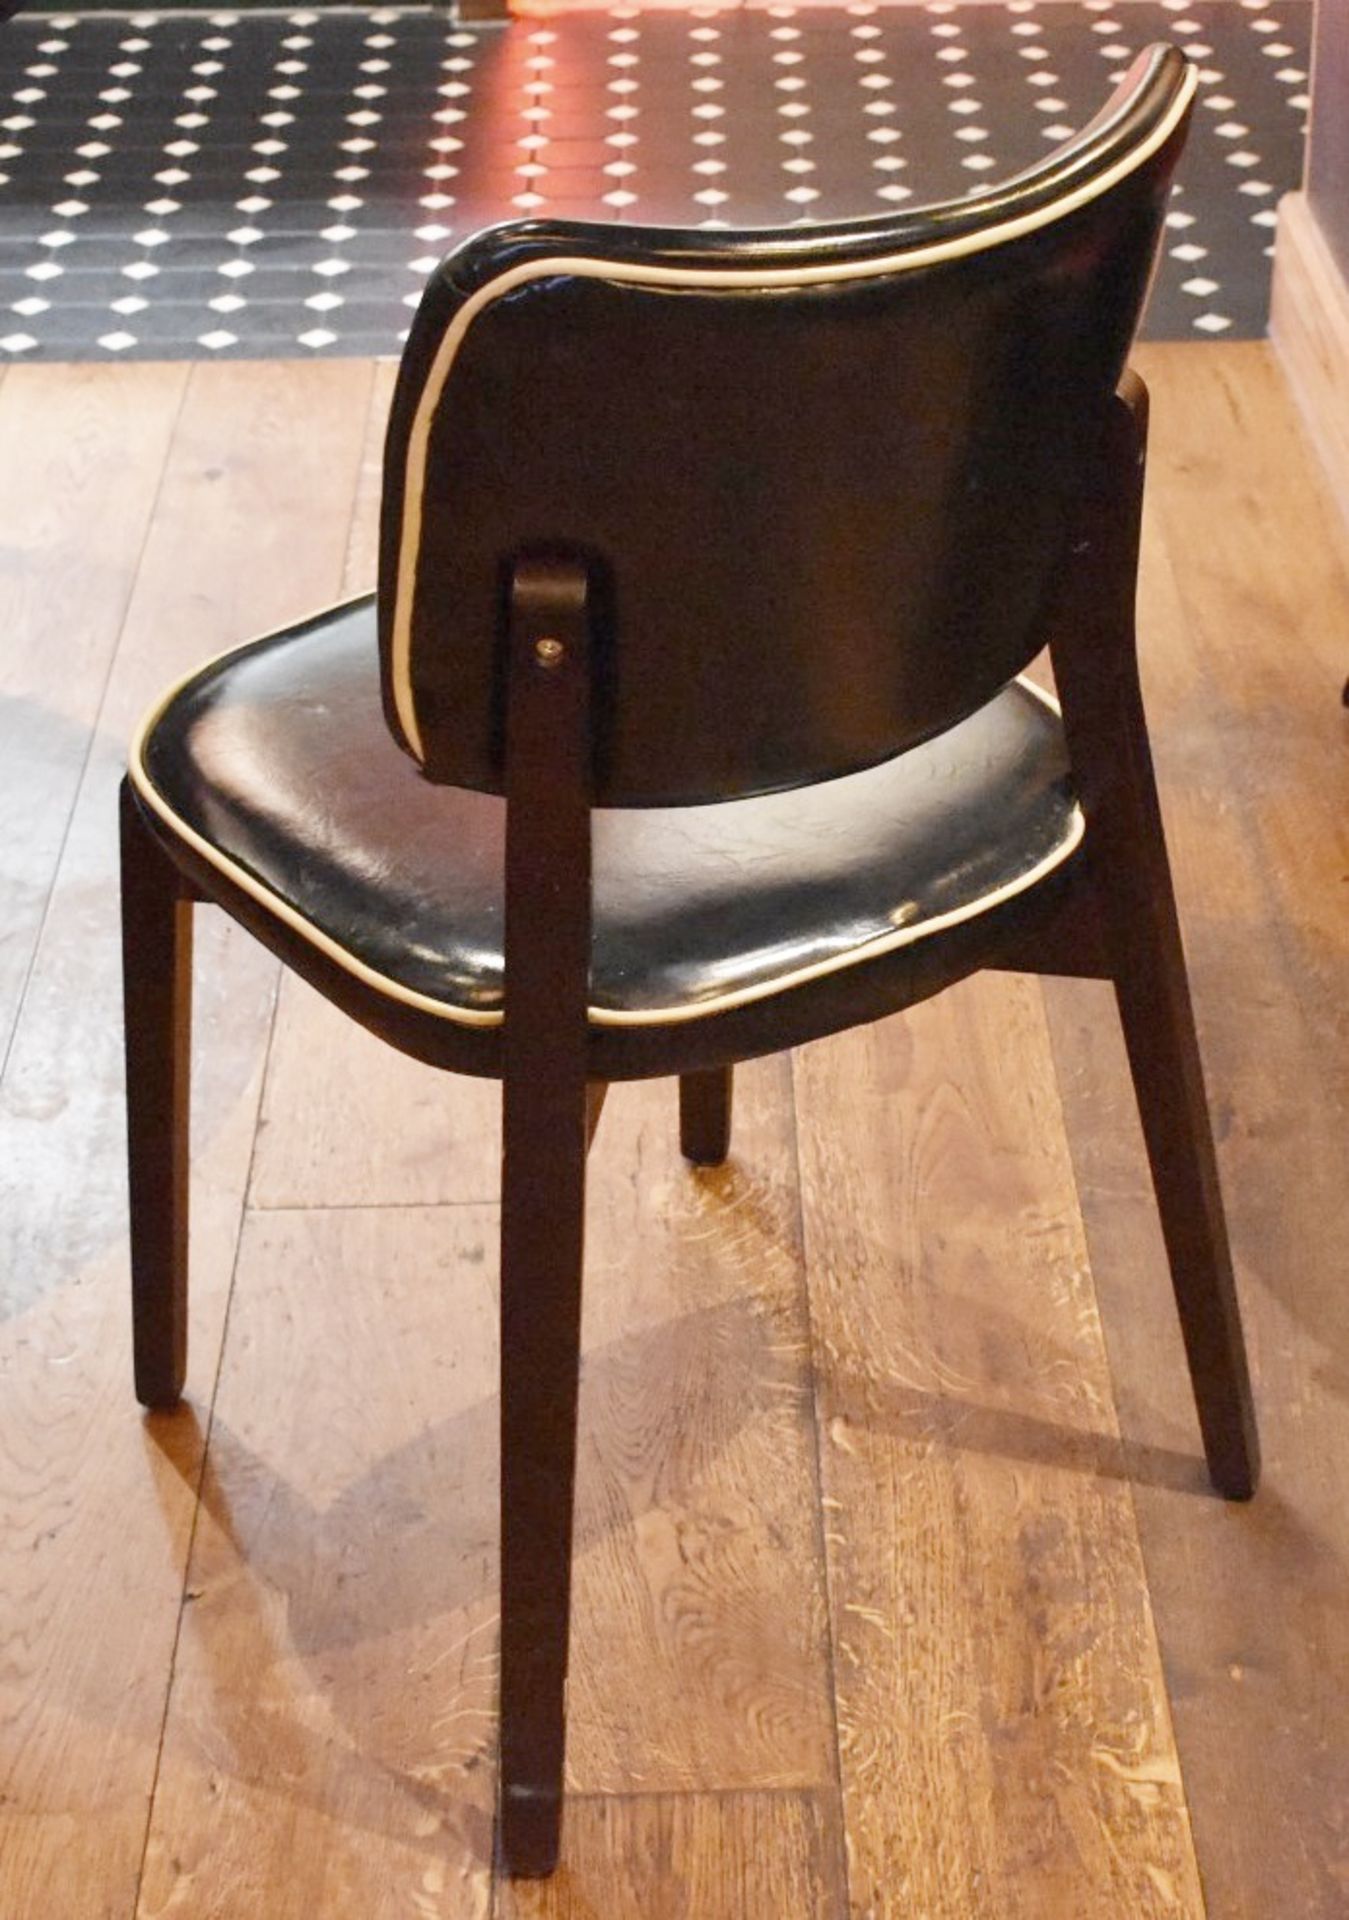 4 x Black Faux Leather Dining Chairs From Italian American Restaurant - Retro Design With Dark - Image 3 of 3